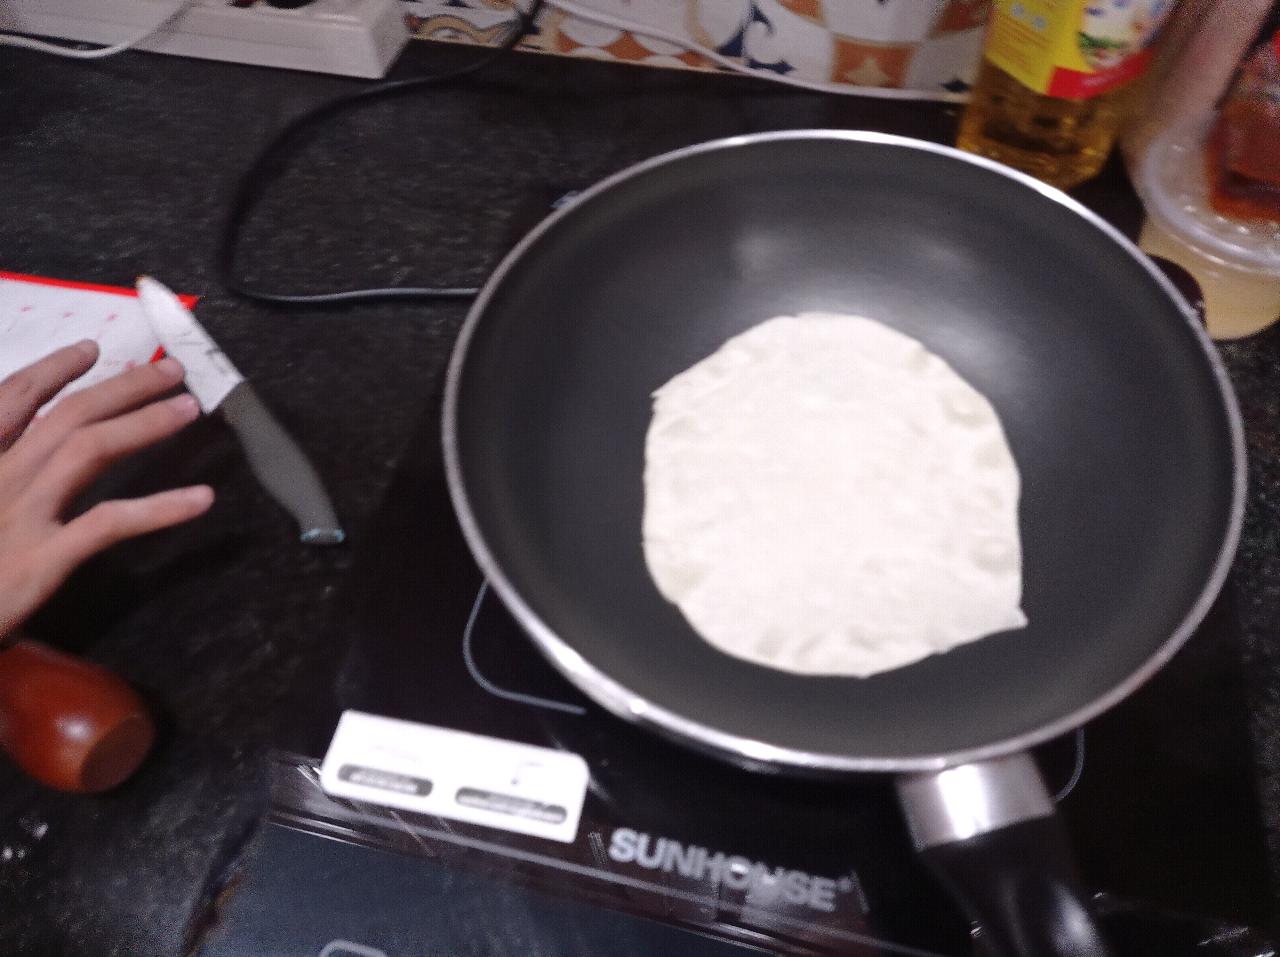 How to make #organic homemade flour #tortillas from scratch. #Taco Tuesday ready for #MemorialDay weekend on Monday, May 30, 2022 watching #DavisRomero 